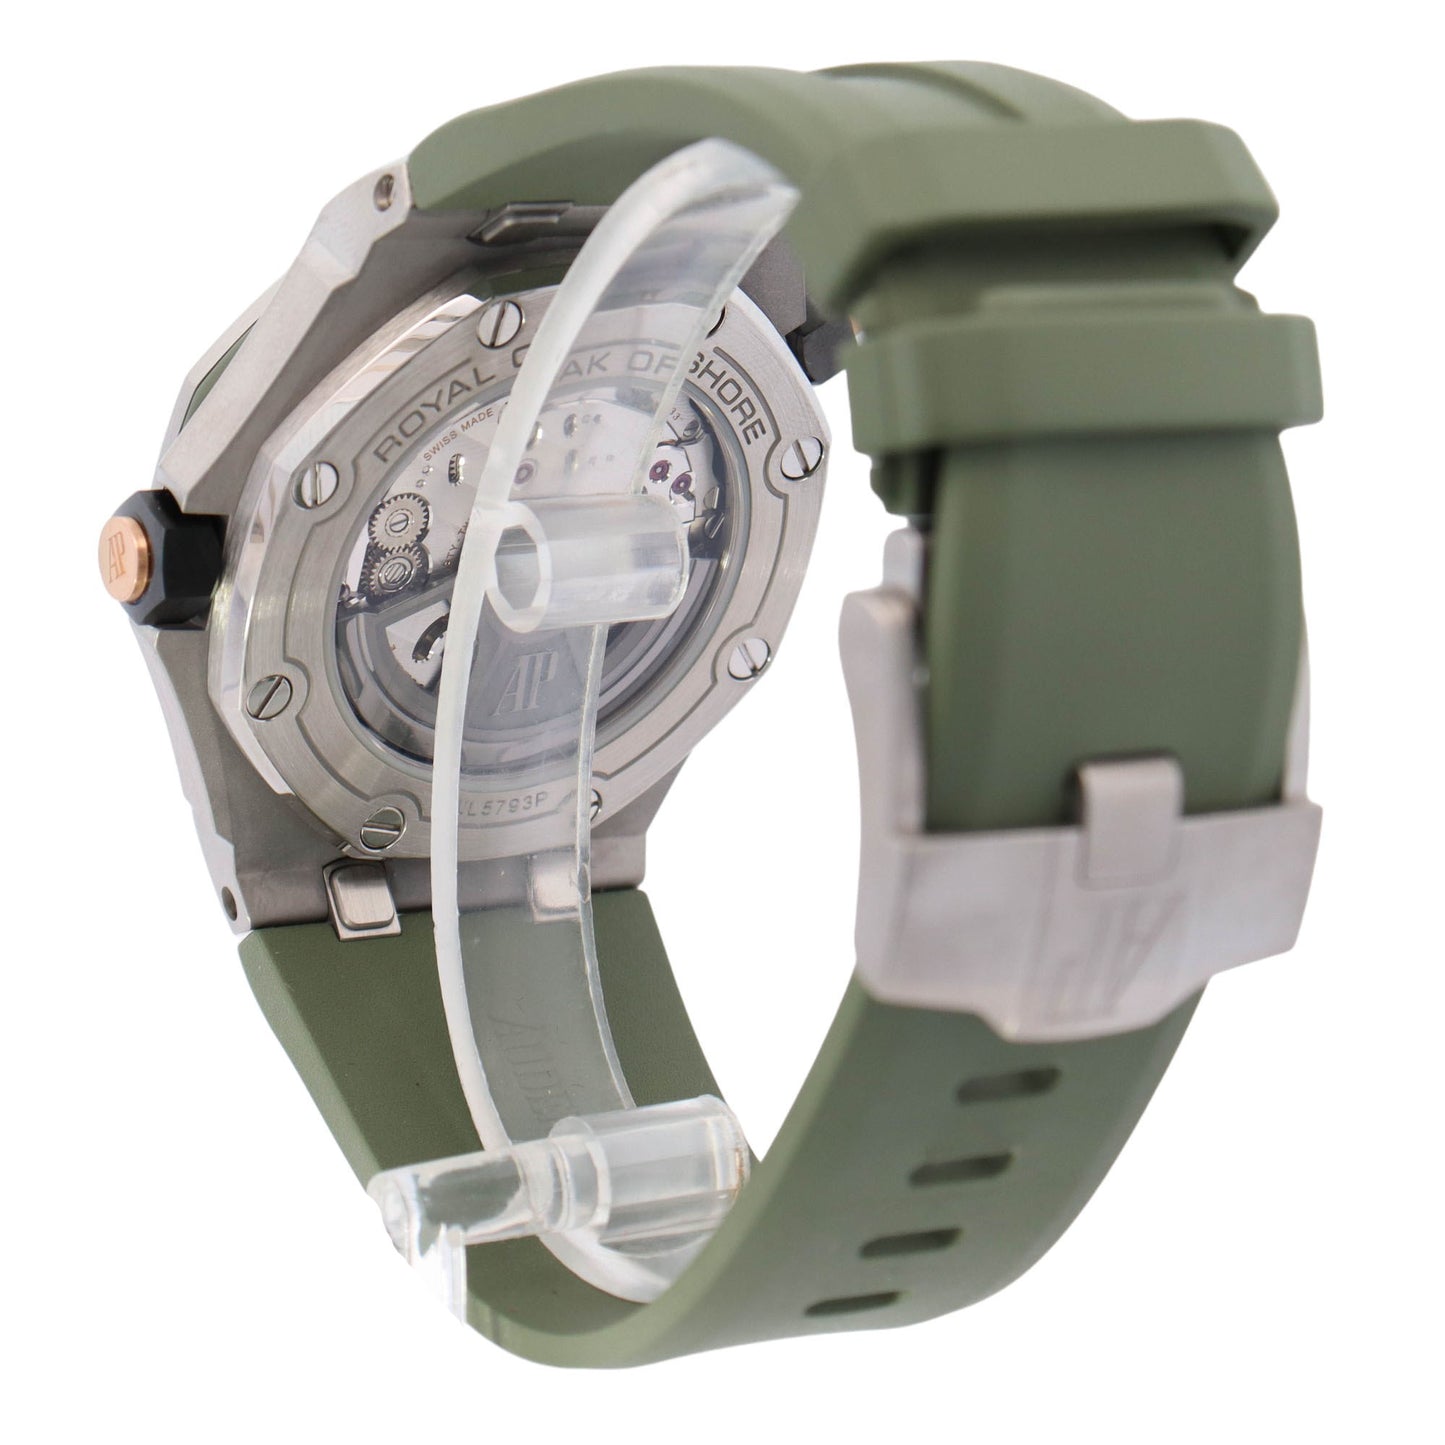 Audemars Piguet Royal Oak Offshore Diver Stainless Steel 42mm Green Dot Dial Watch Reference# 15720ST.OO.A052CA.01 - Happy Jewelers Fine Jewelry Lifetime Warranty